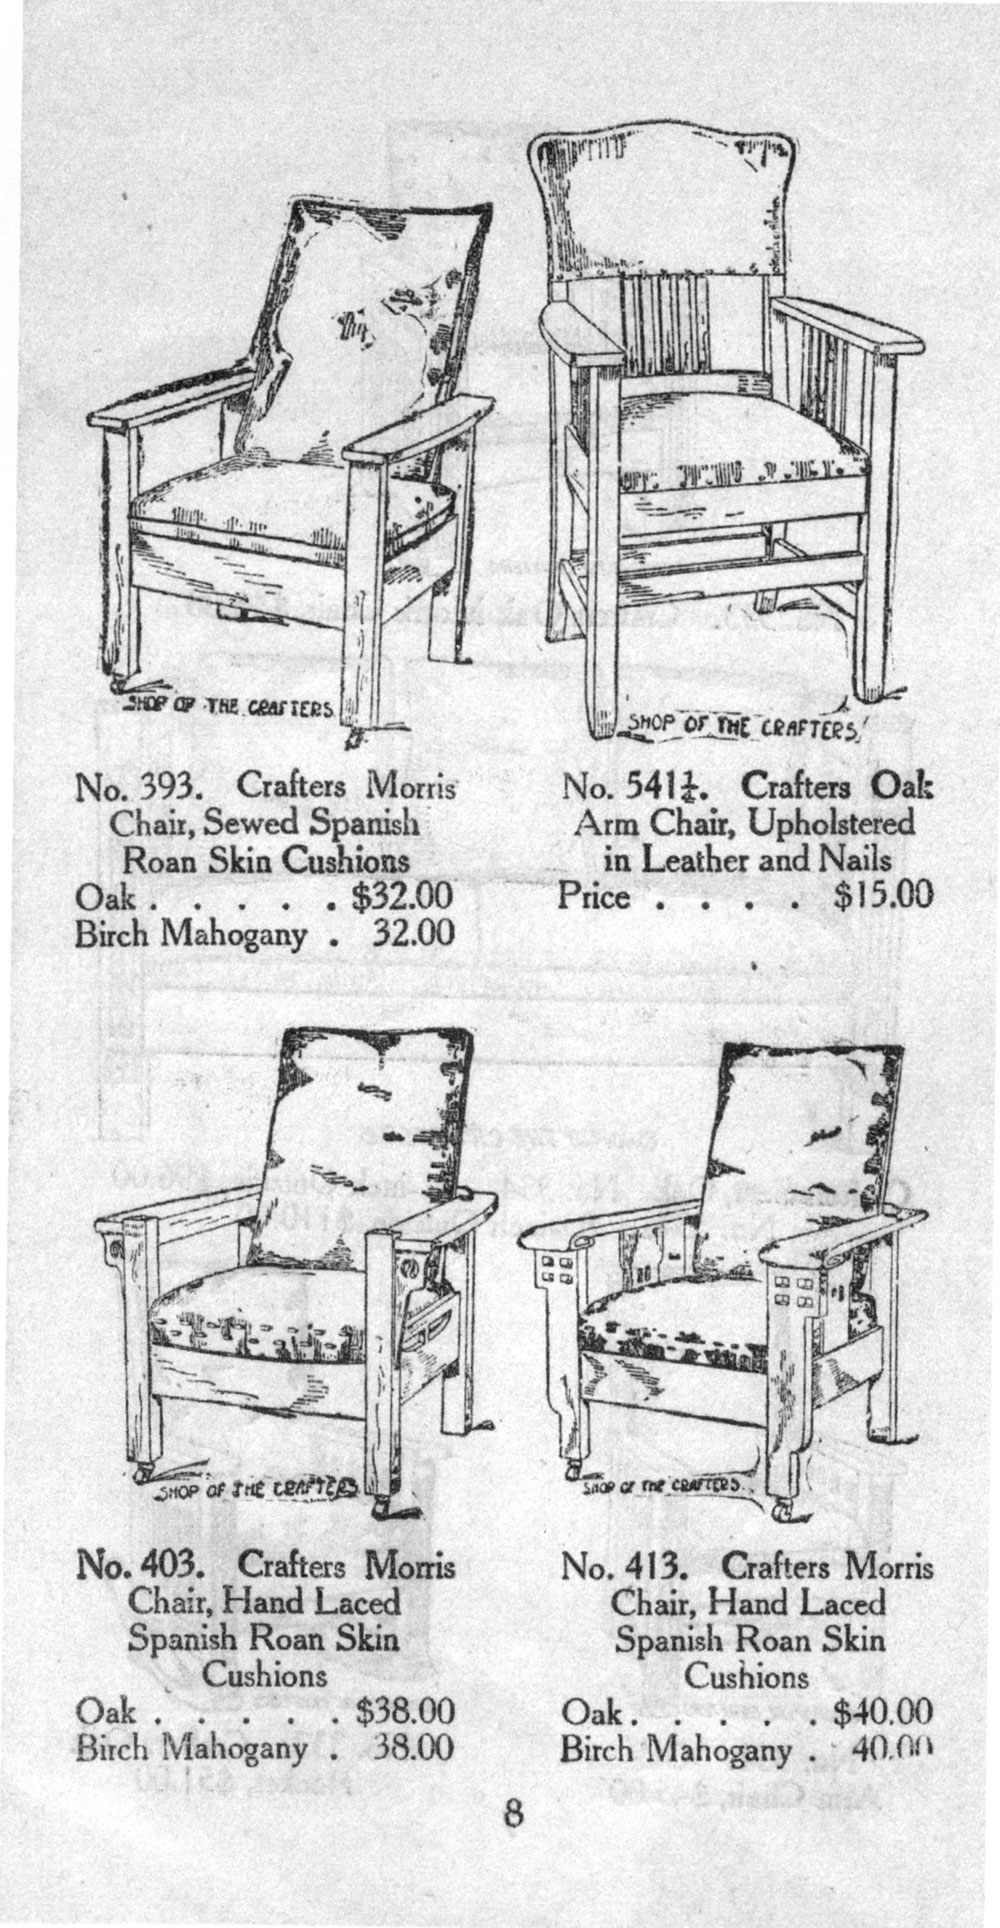 shop-of-the-crafter-morris-chairs